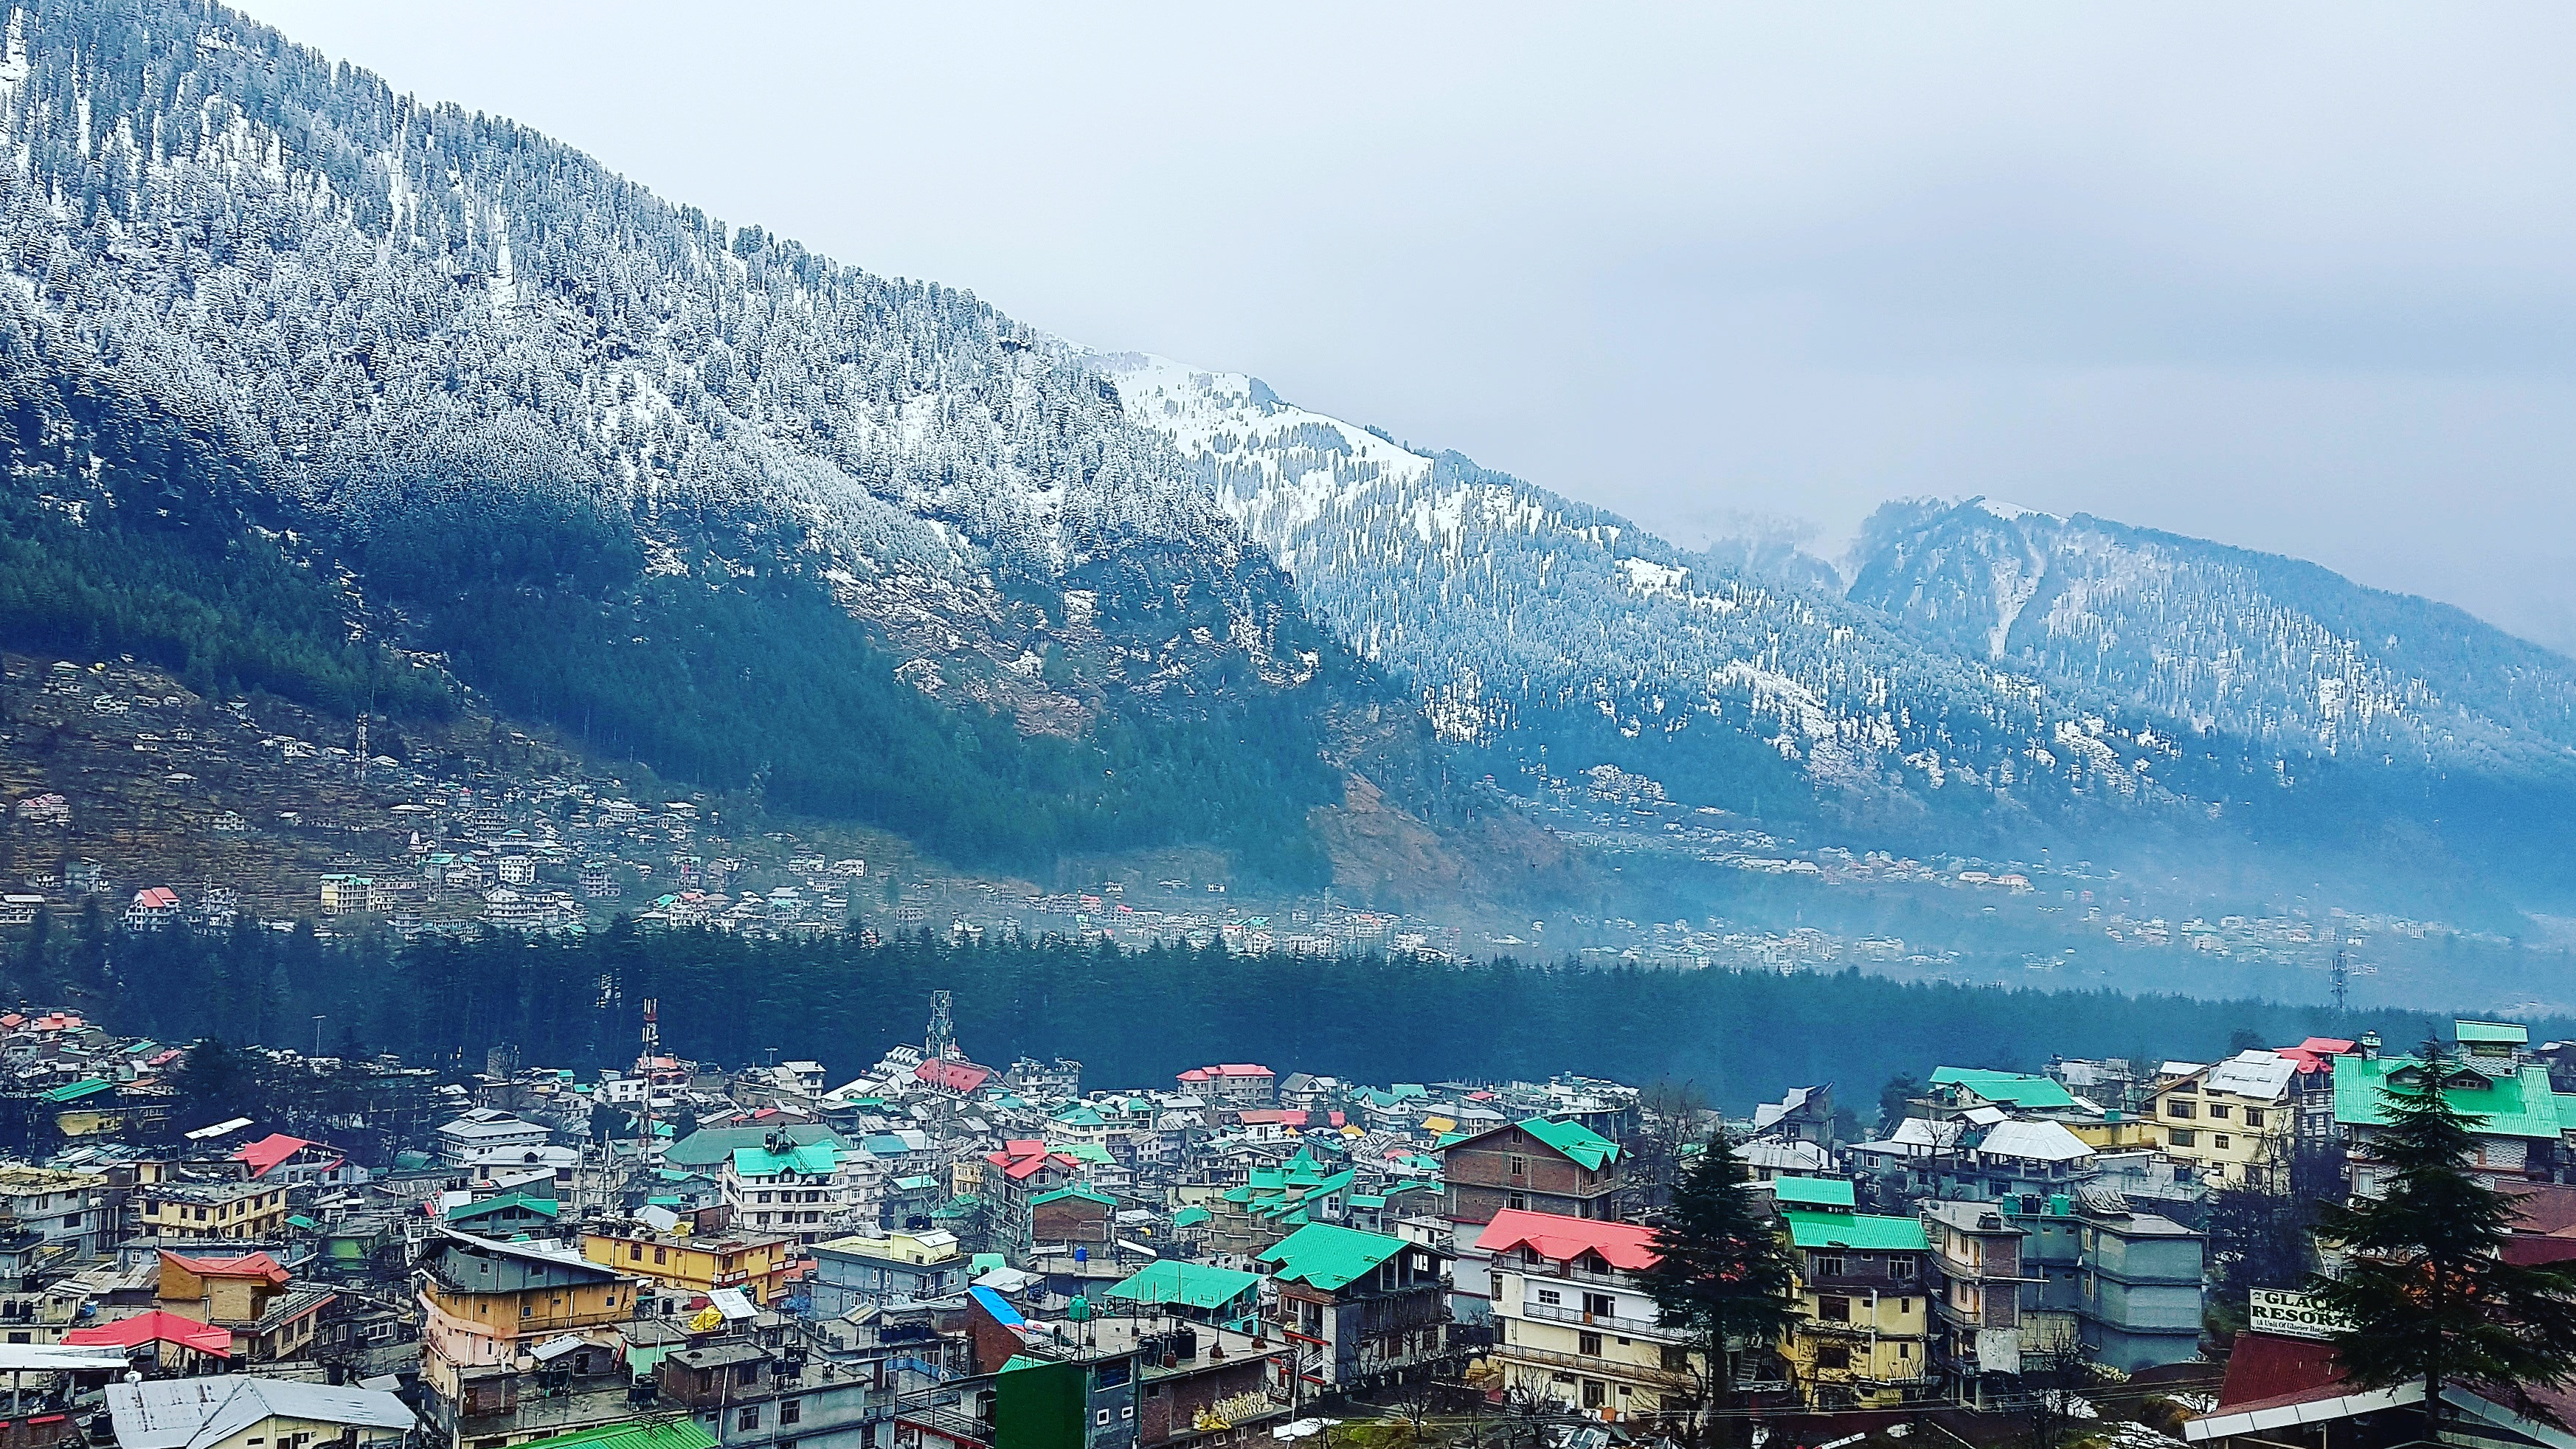 Manali is a perfect weekend getaway when visiting hill stations near Delhi